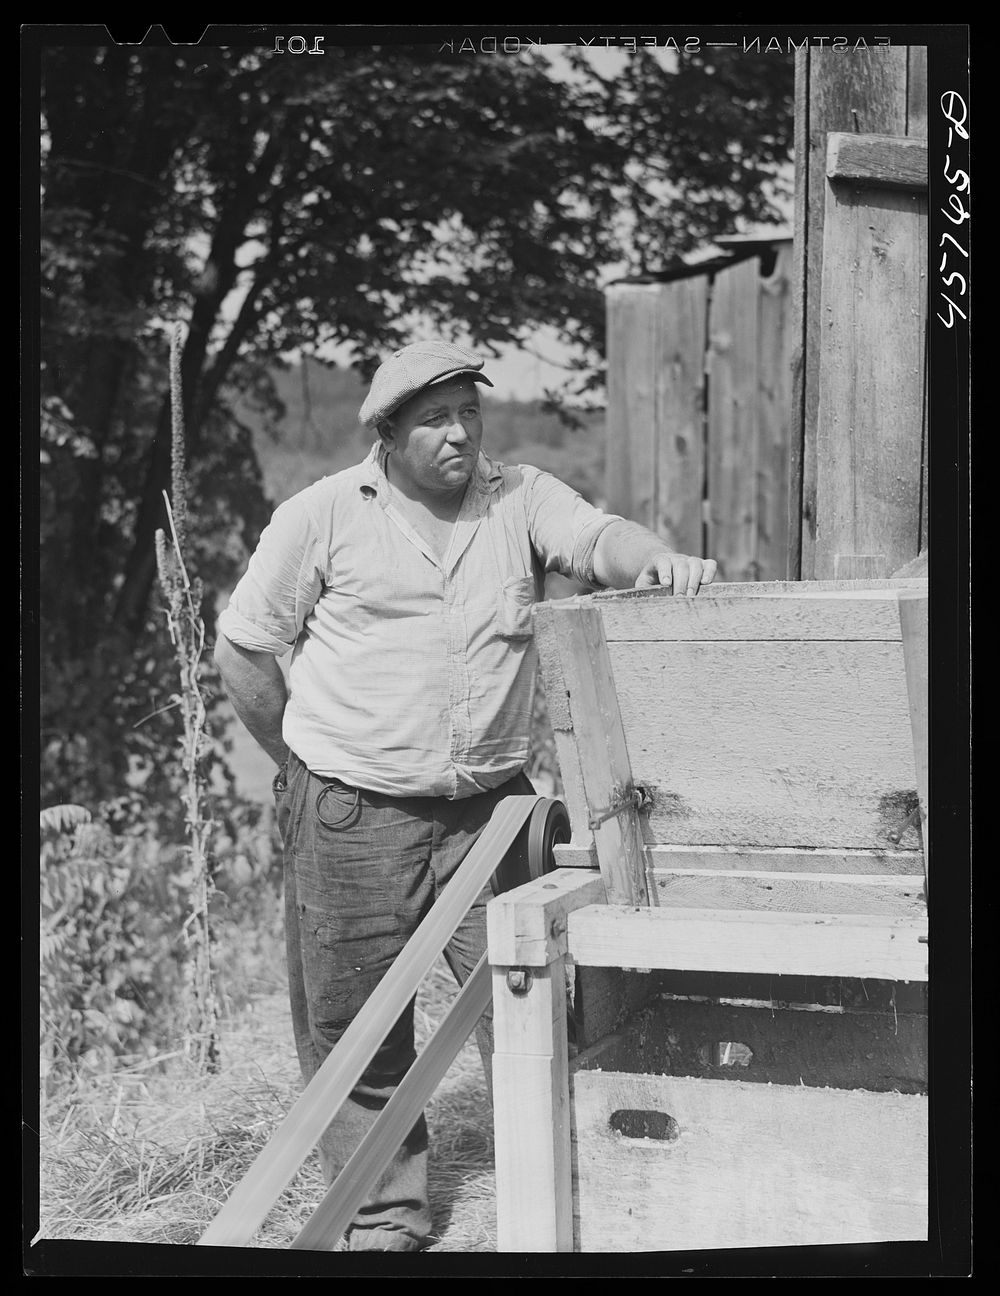 Tunbridge farmer at the cider making machine at the World's Fair. Tunbridge, Vermont. Sourced from the Library of Congress.